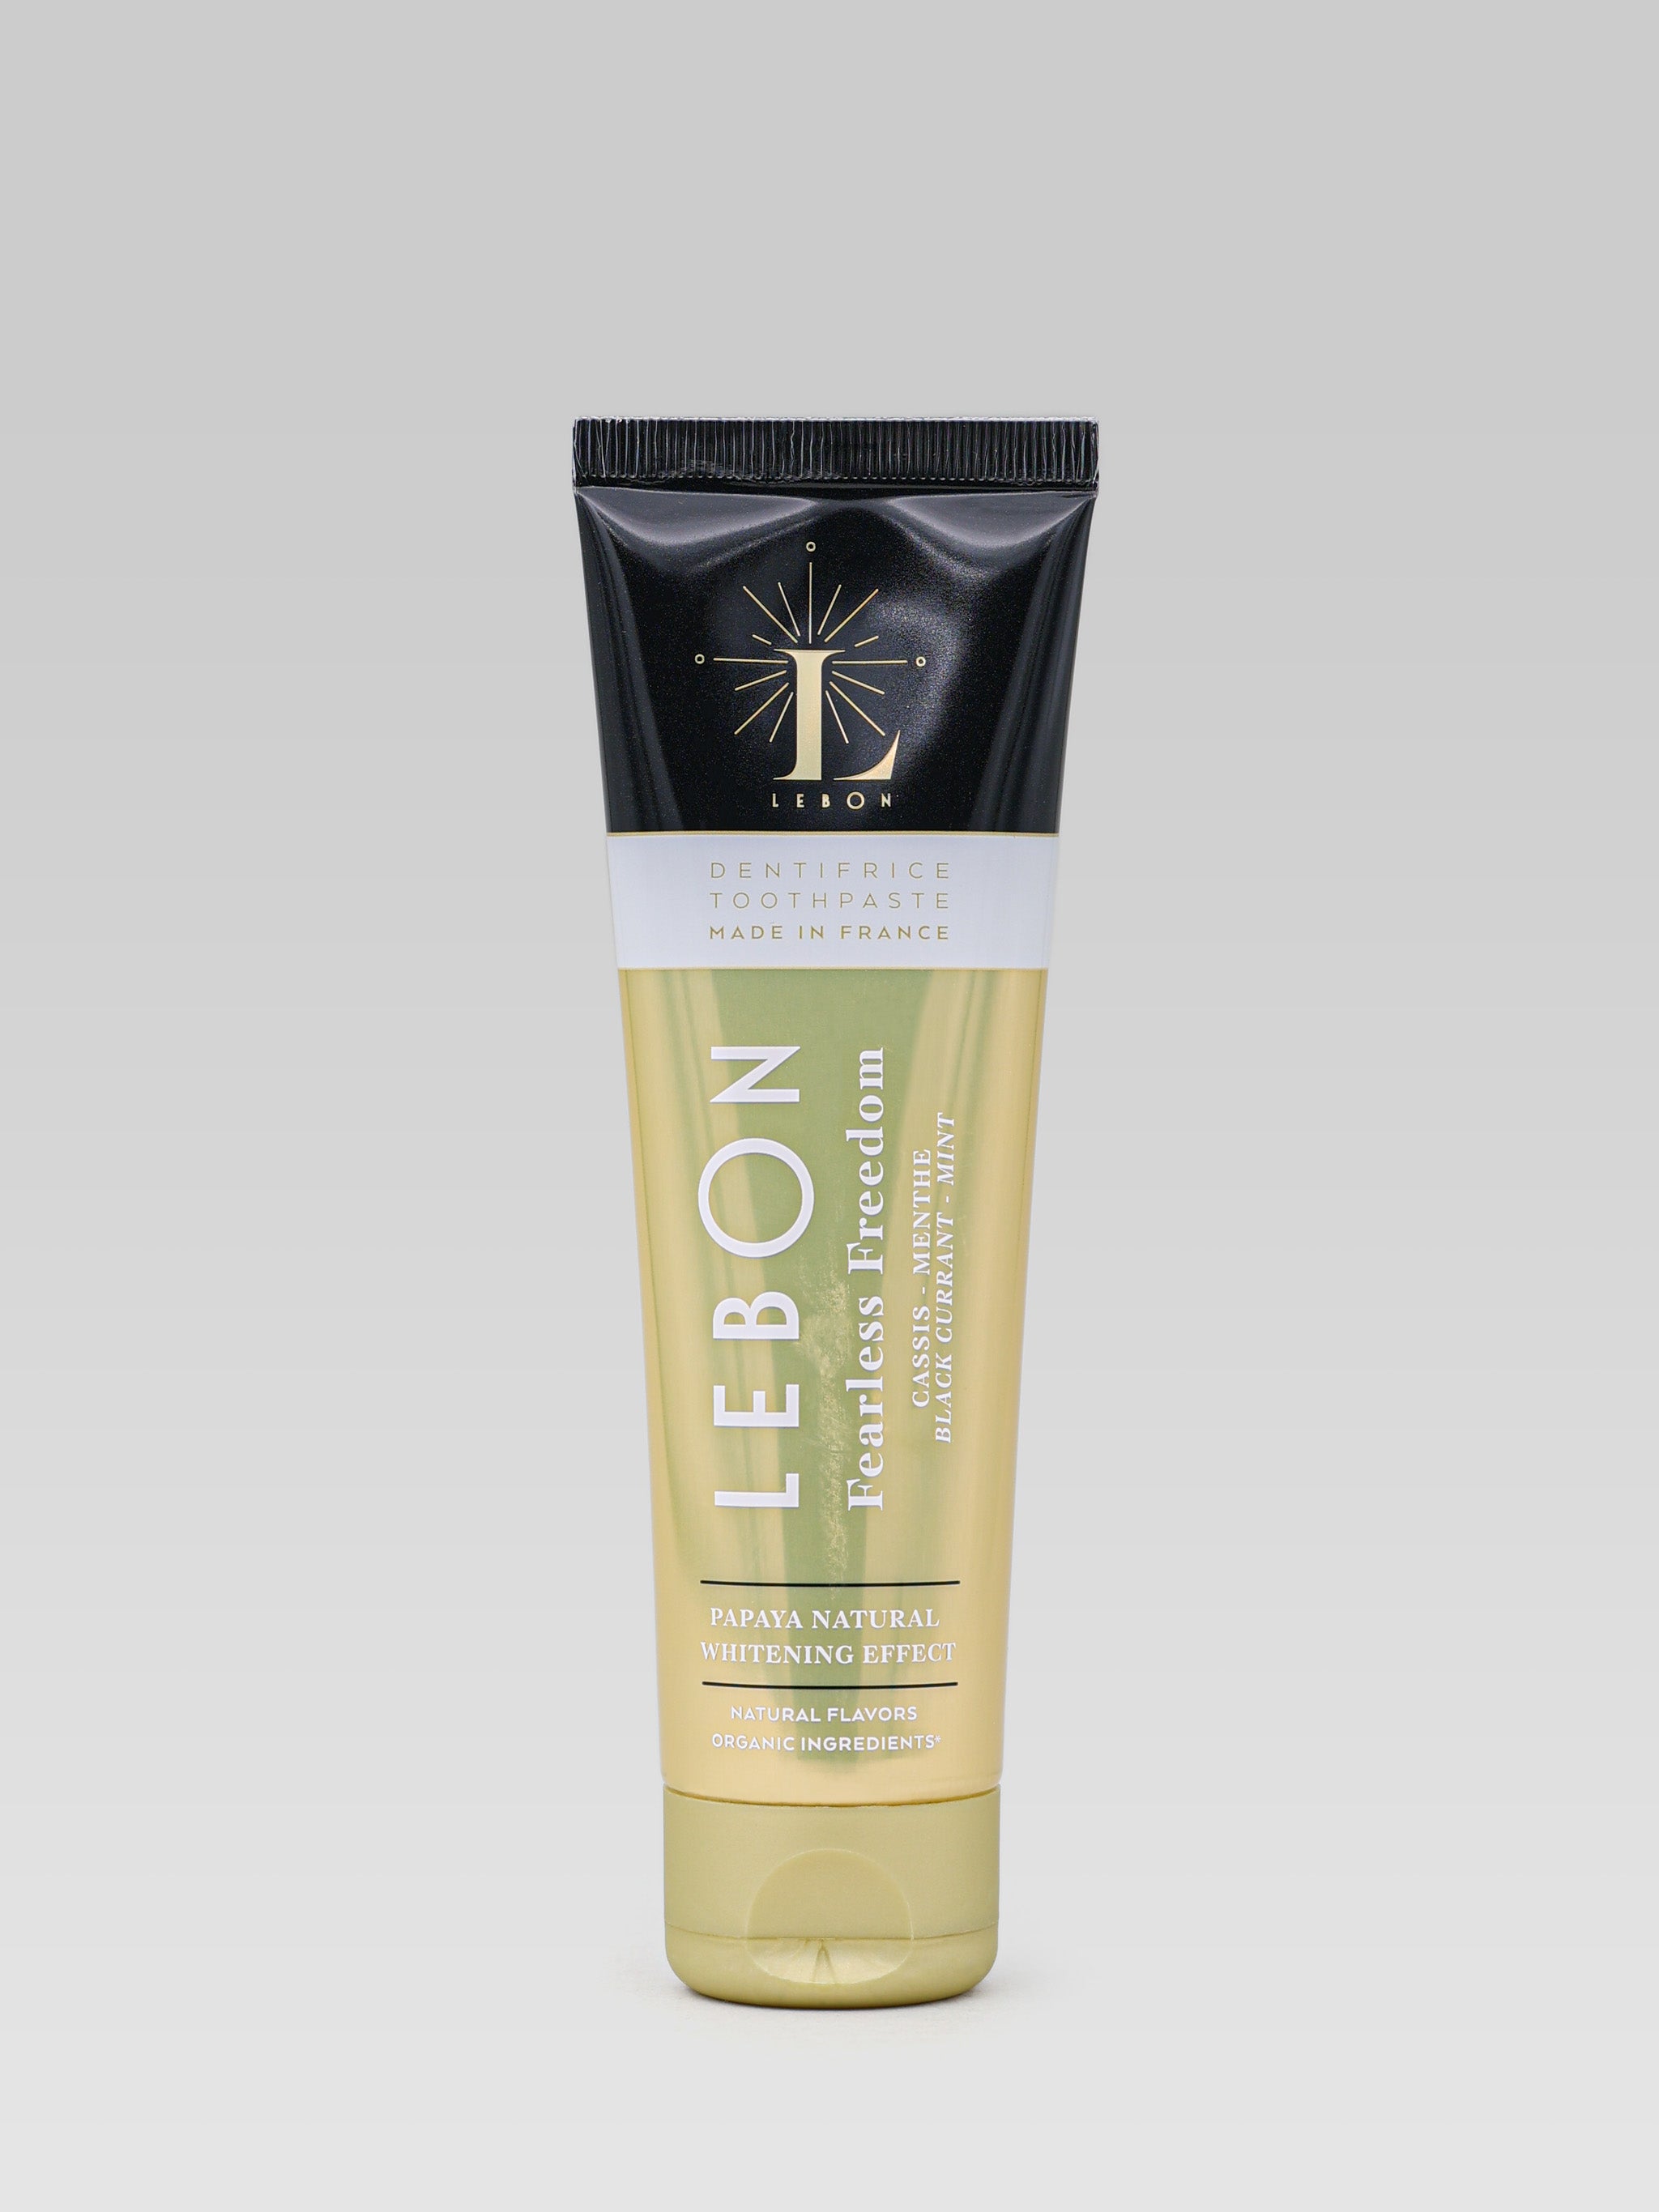 LEBON Toothpaste Fearless Freedom product shot